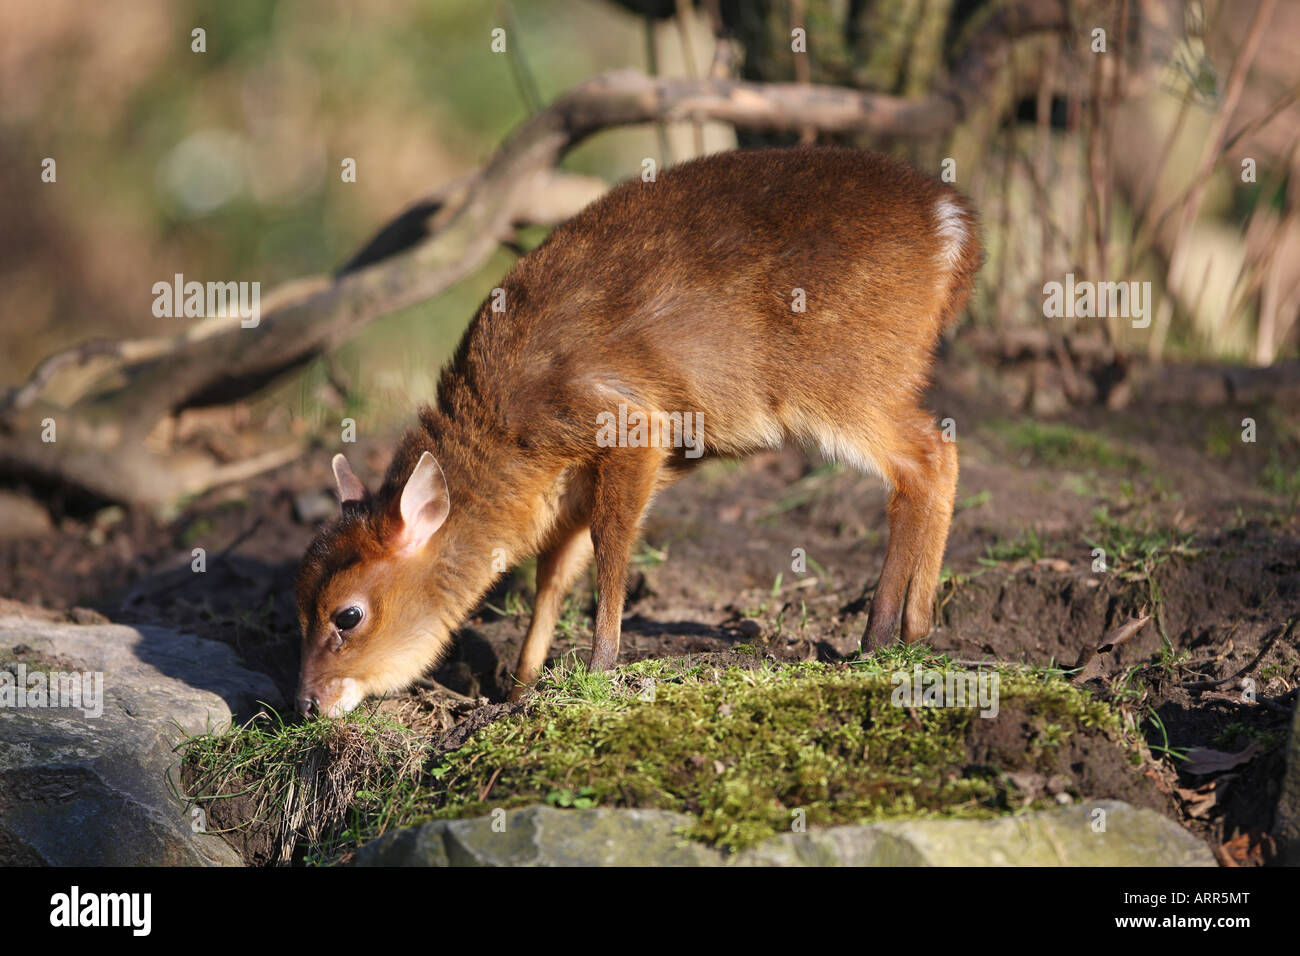 Reeves's (or Chinese) muntjac infant - Muntiacus reevesi Stock Photo